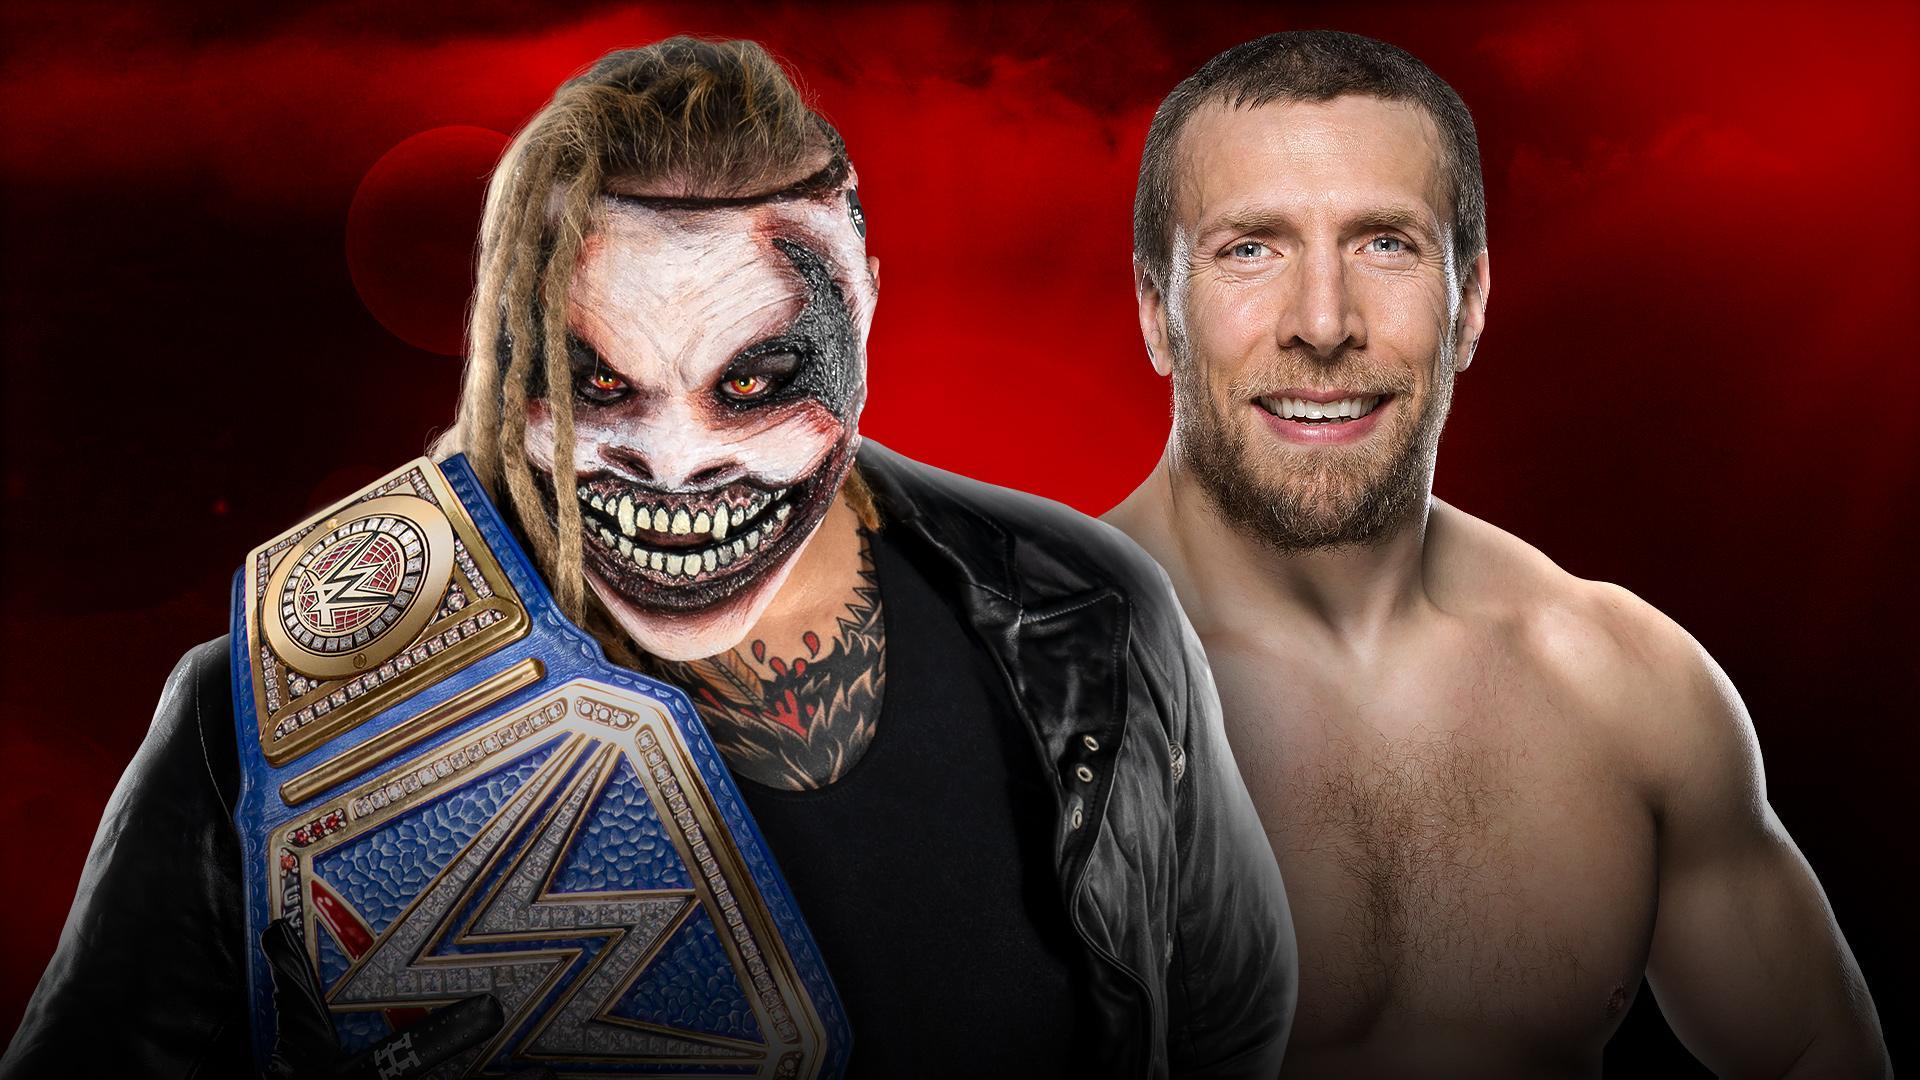 Royal Rumble 2020 Preview and Match Predictions